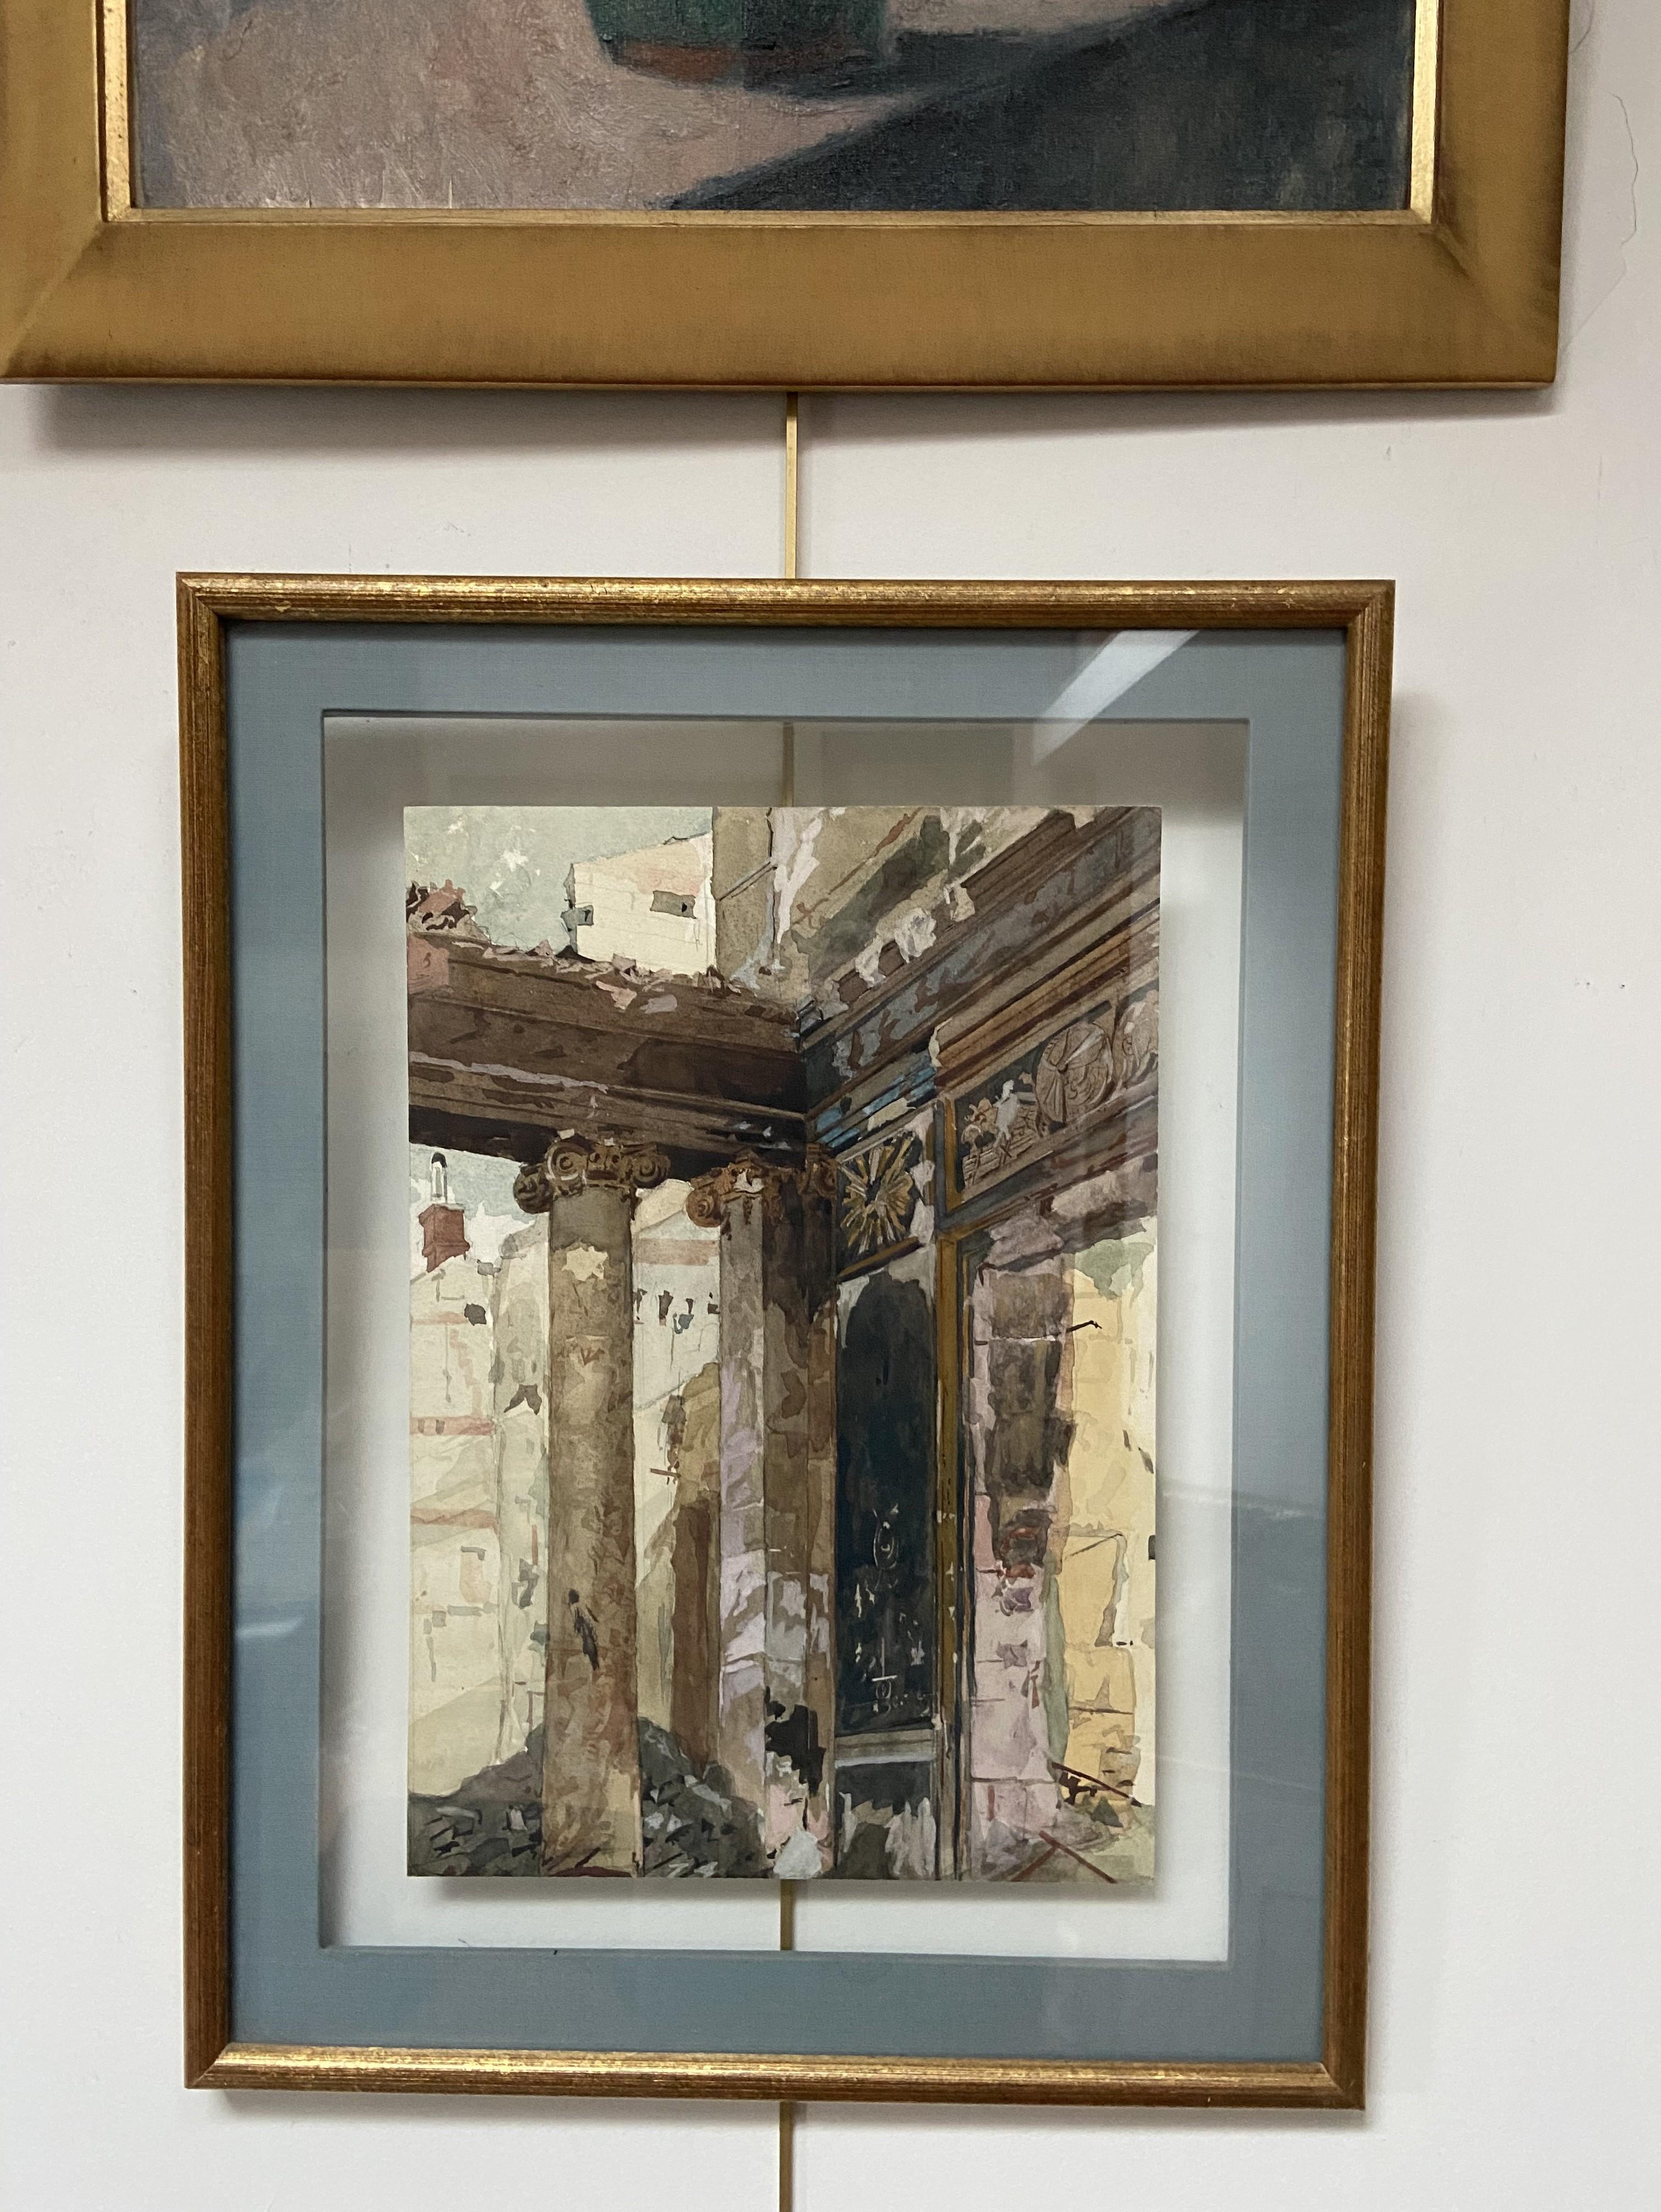 20th century French school
Colonnade in ruins, 
watercolor on paper
37 x 26 cm
Framed in a highly original way between two sheets of Plexiglas (a small, barely visible spot on the blue fabric of the passe partout at the bottom). 52 x 41 cm

This